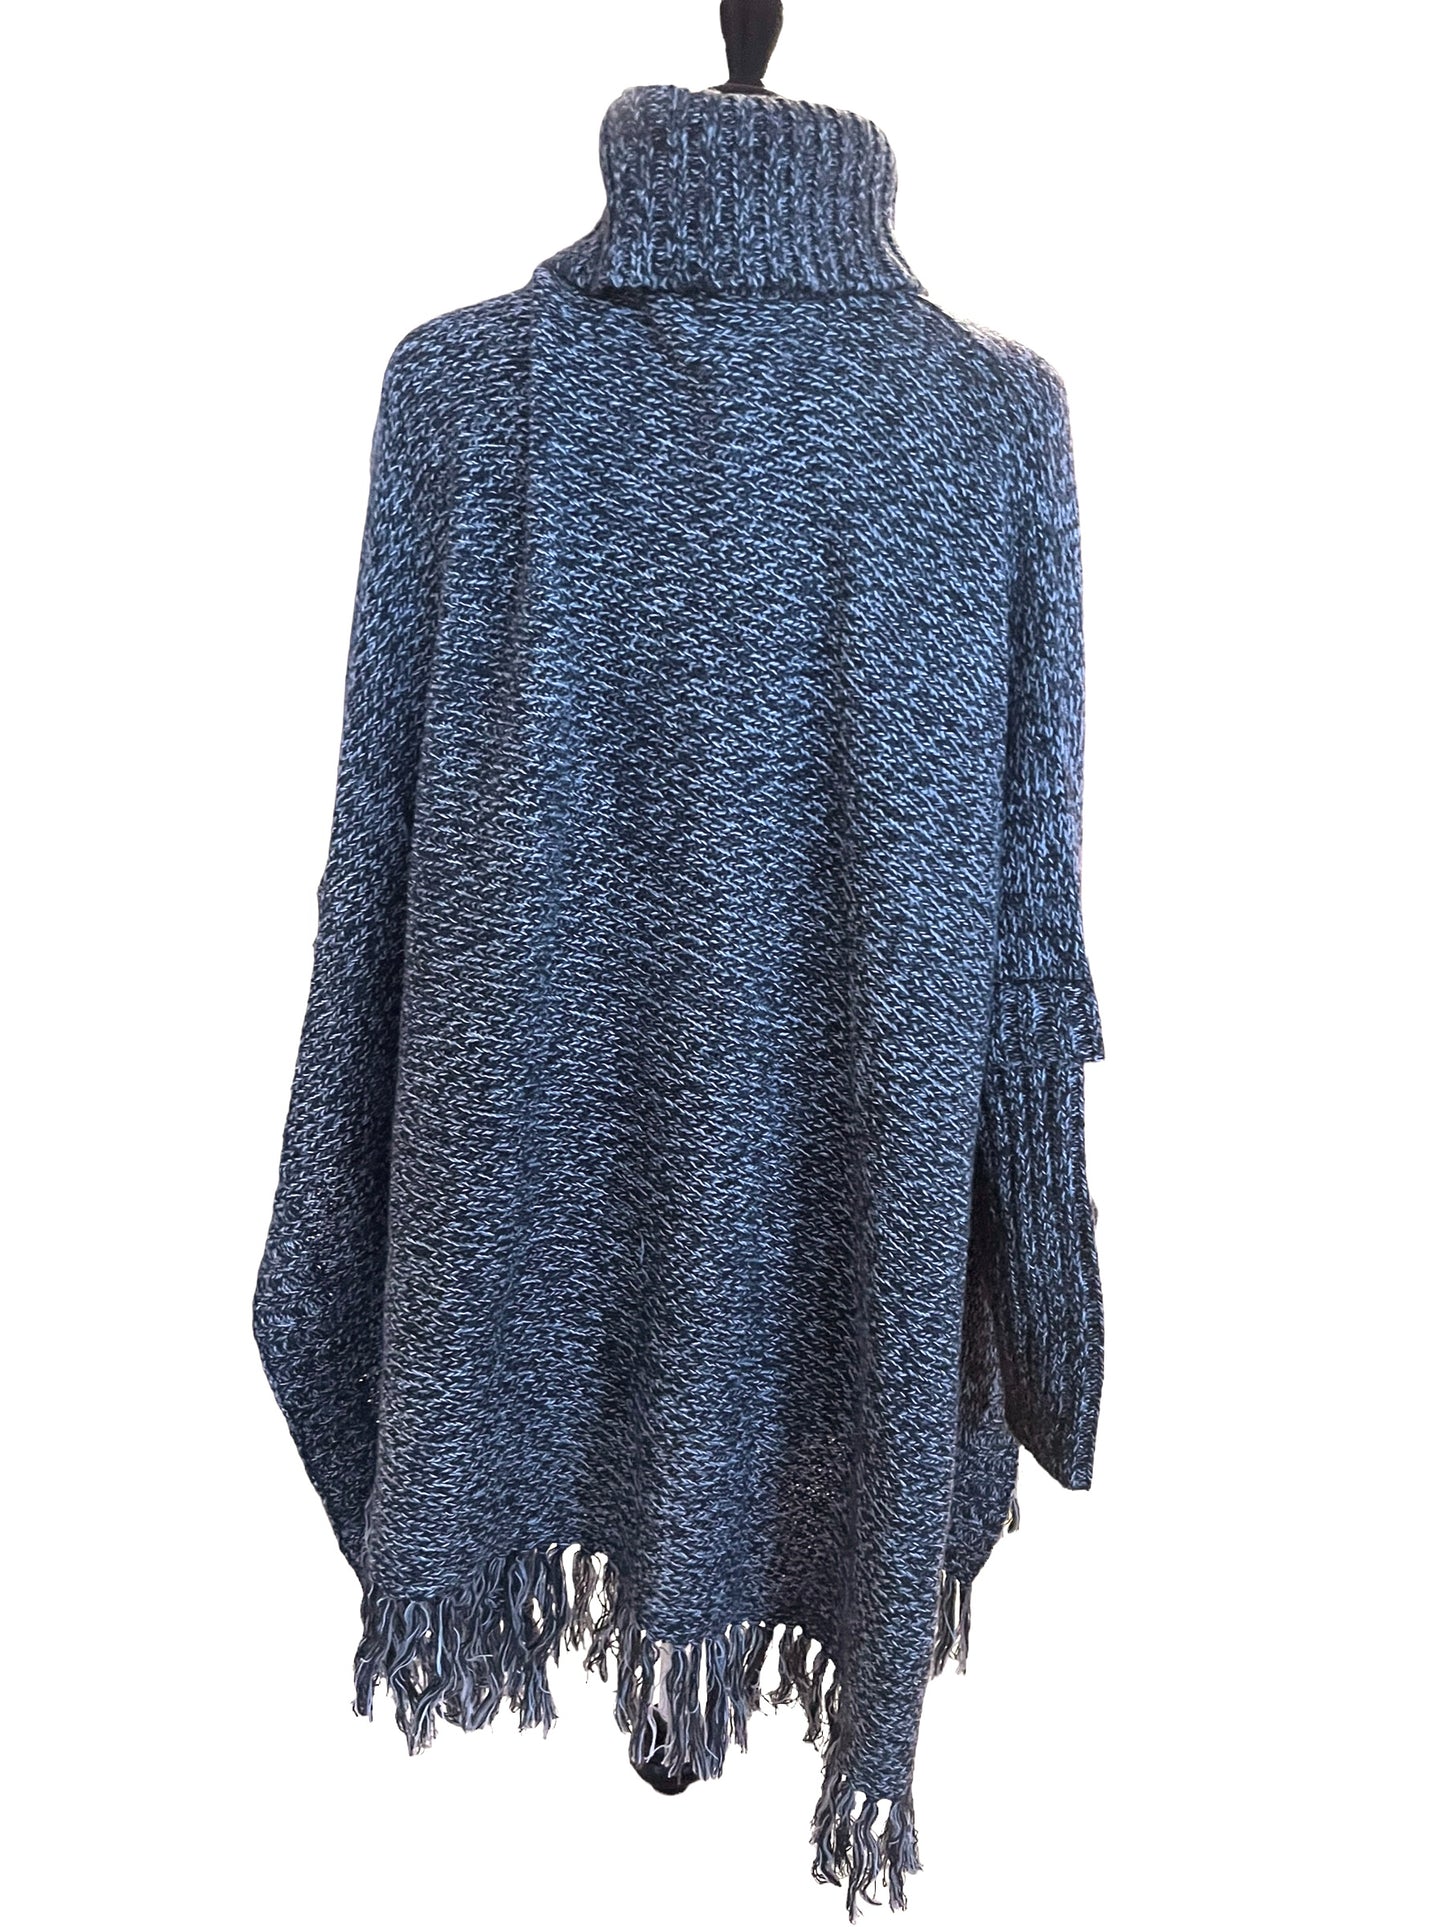 RD Style Grey Sweater/Poncho